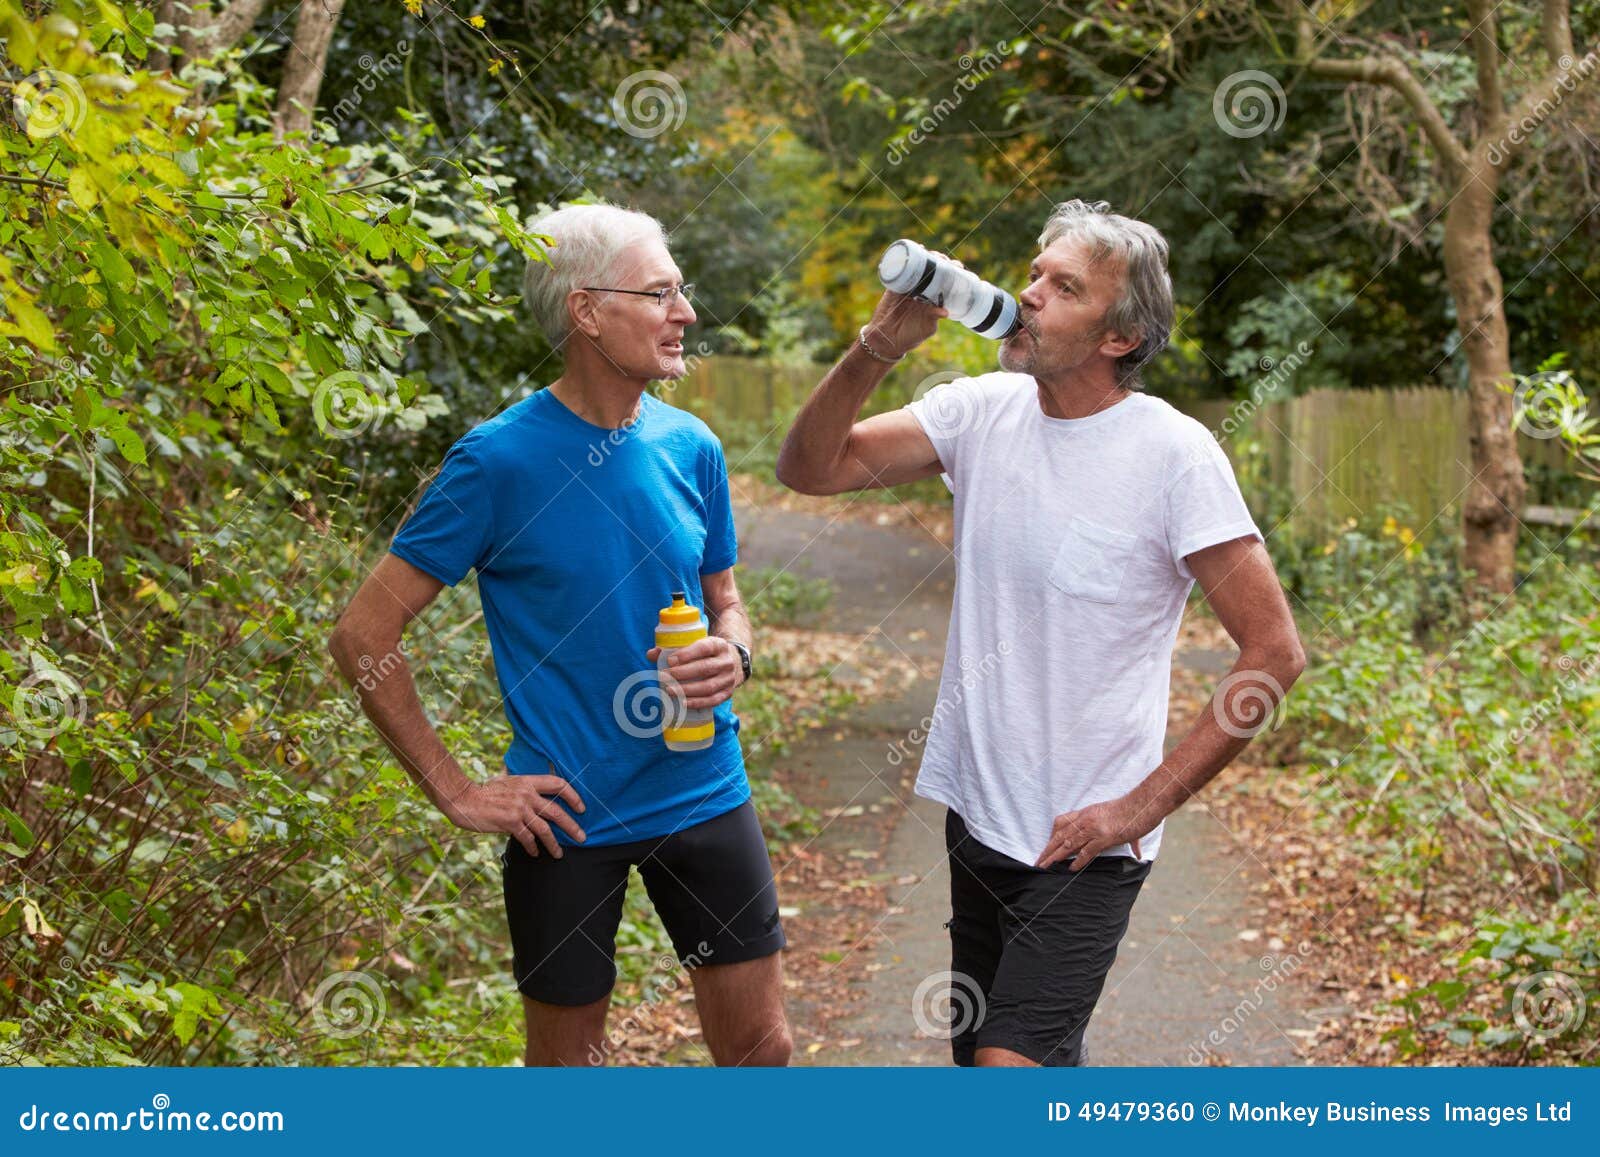 two mature male joggers taking break whilst on run